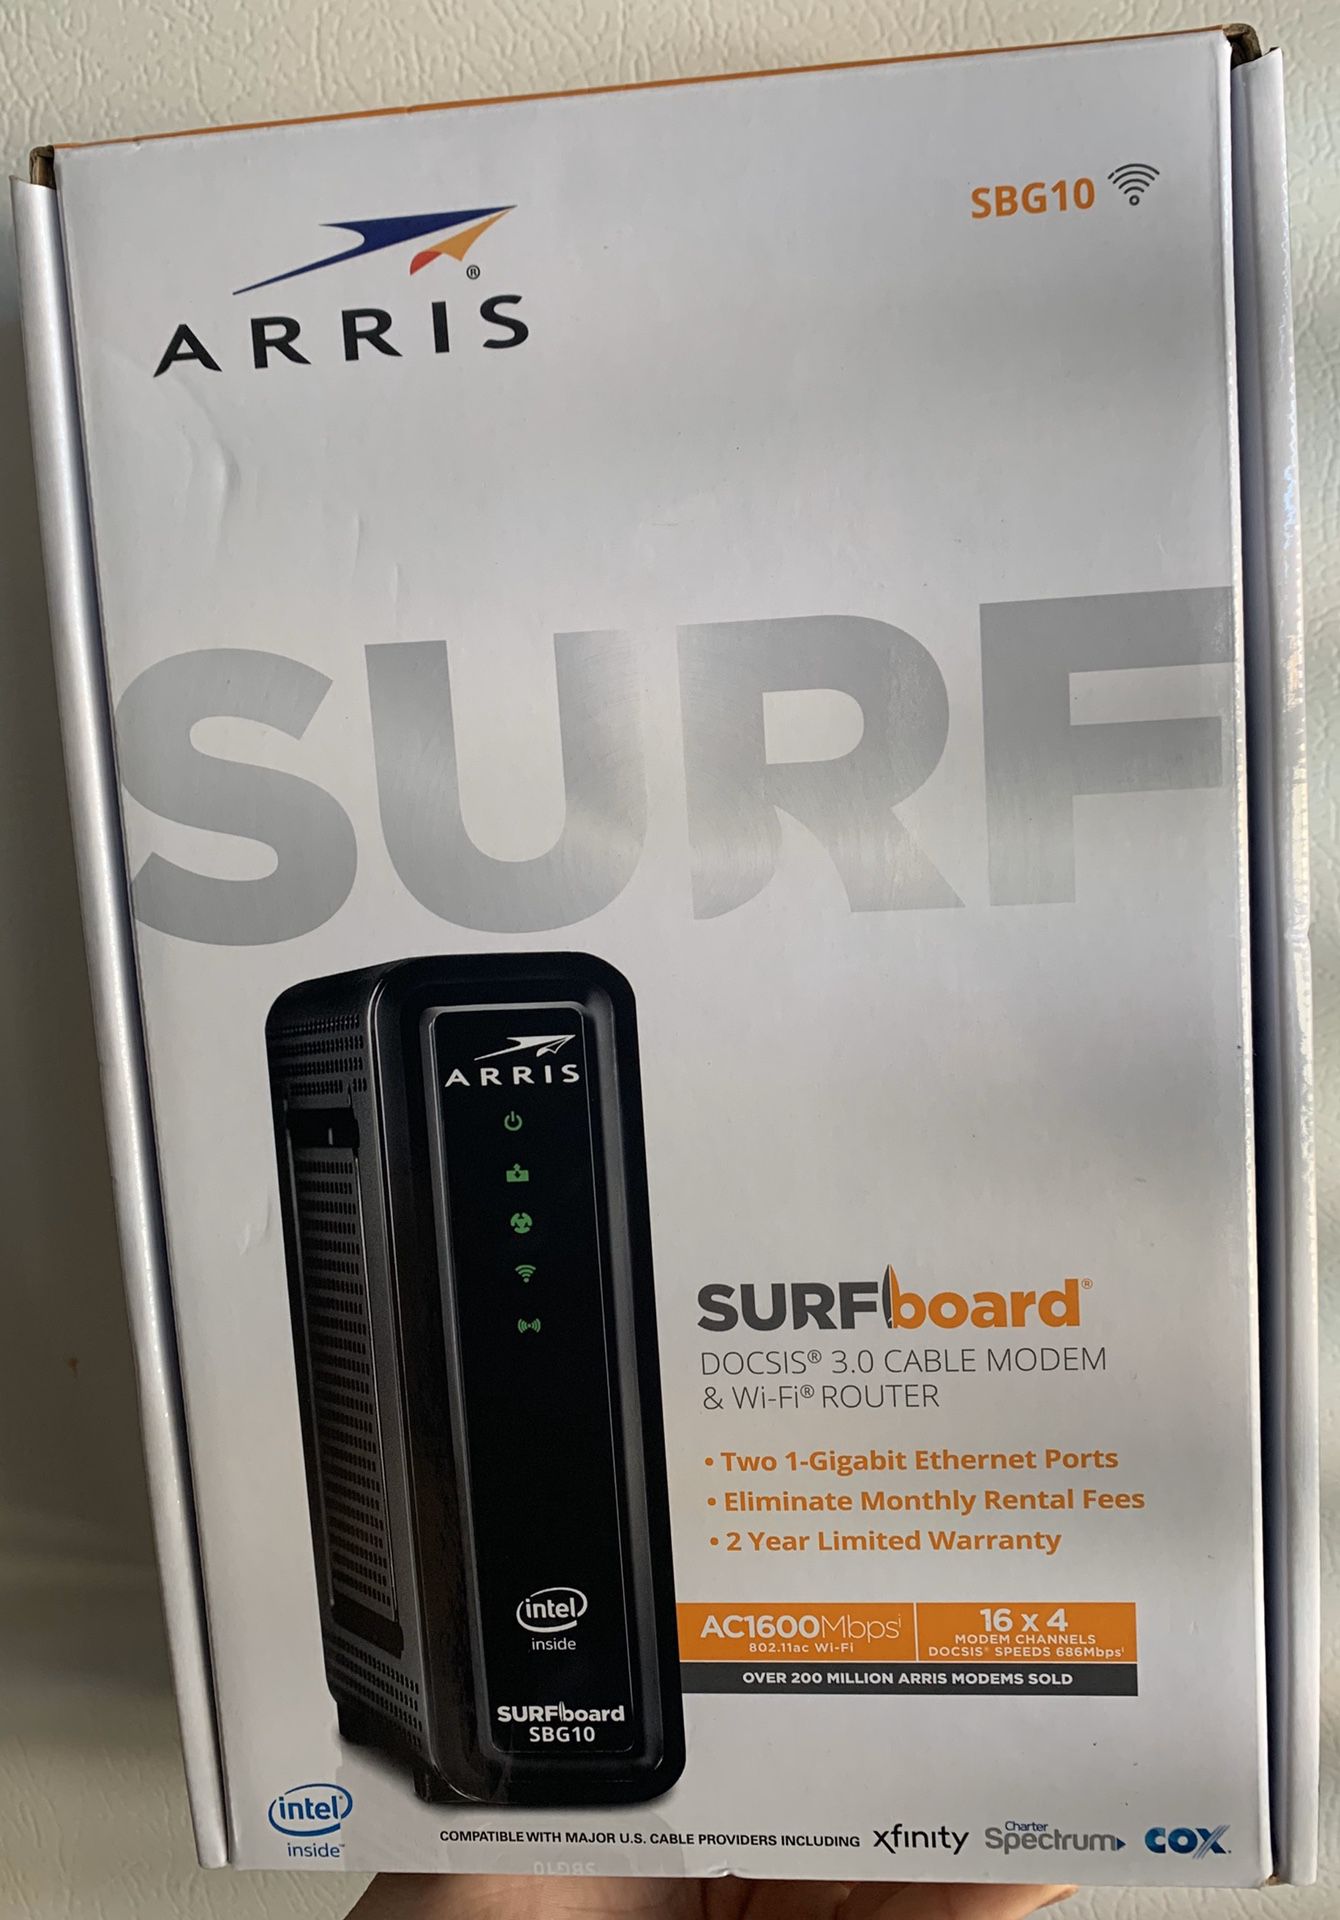 ARRIS SBG10 DOCSIS 3.0 CABLE MODEM & WI-FI ROUTER (Sealed Box)